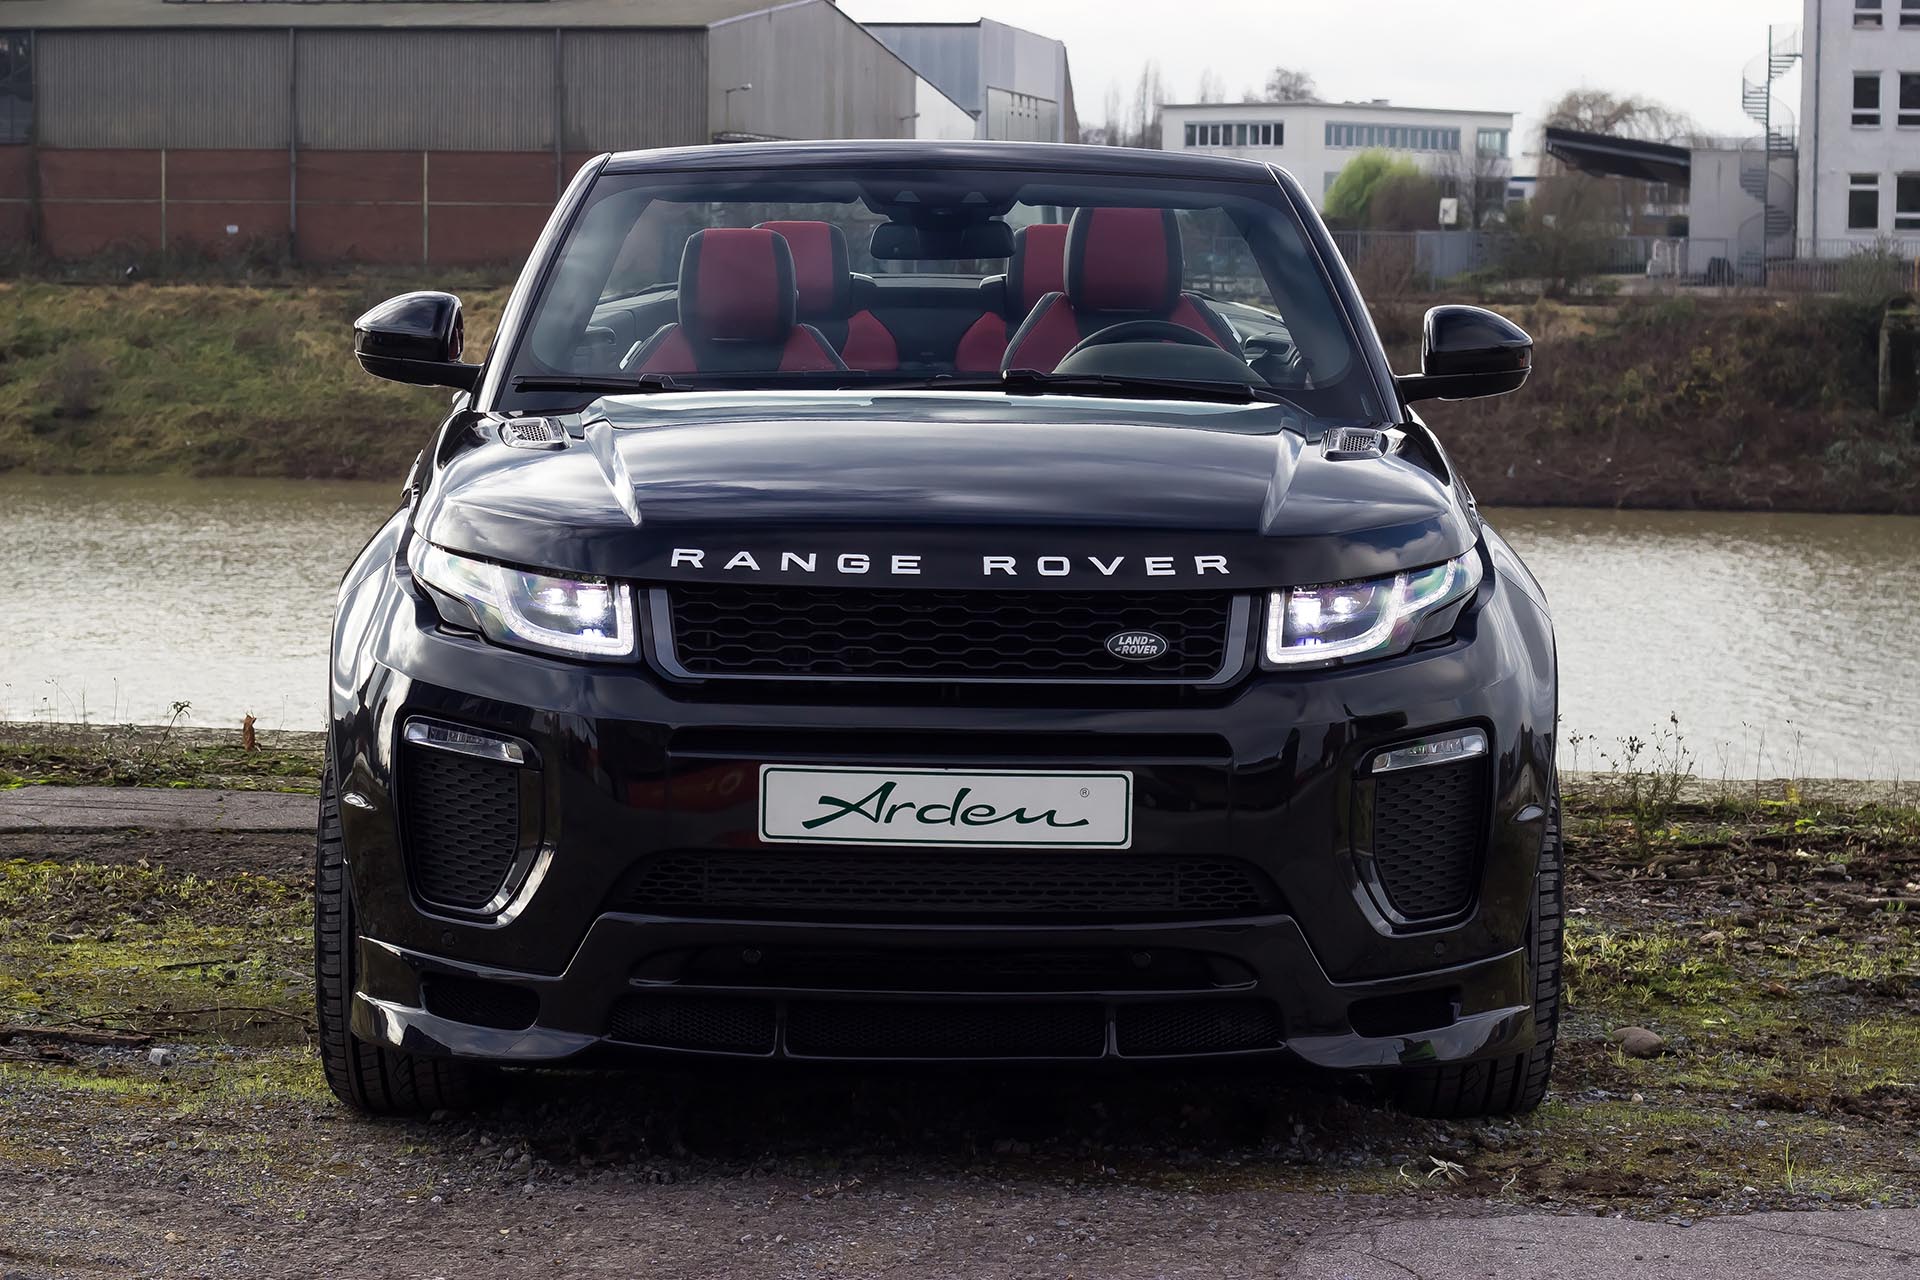 Range Rover Evoque by Arden Daily Tuning